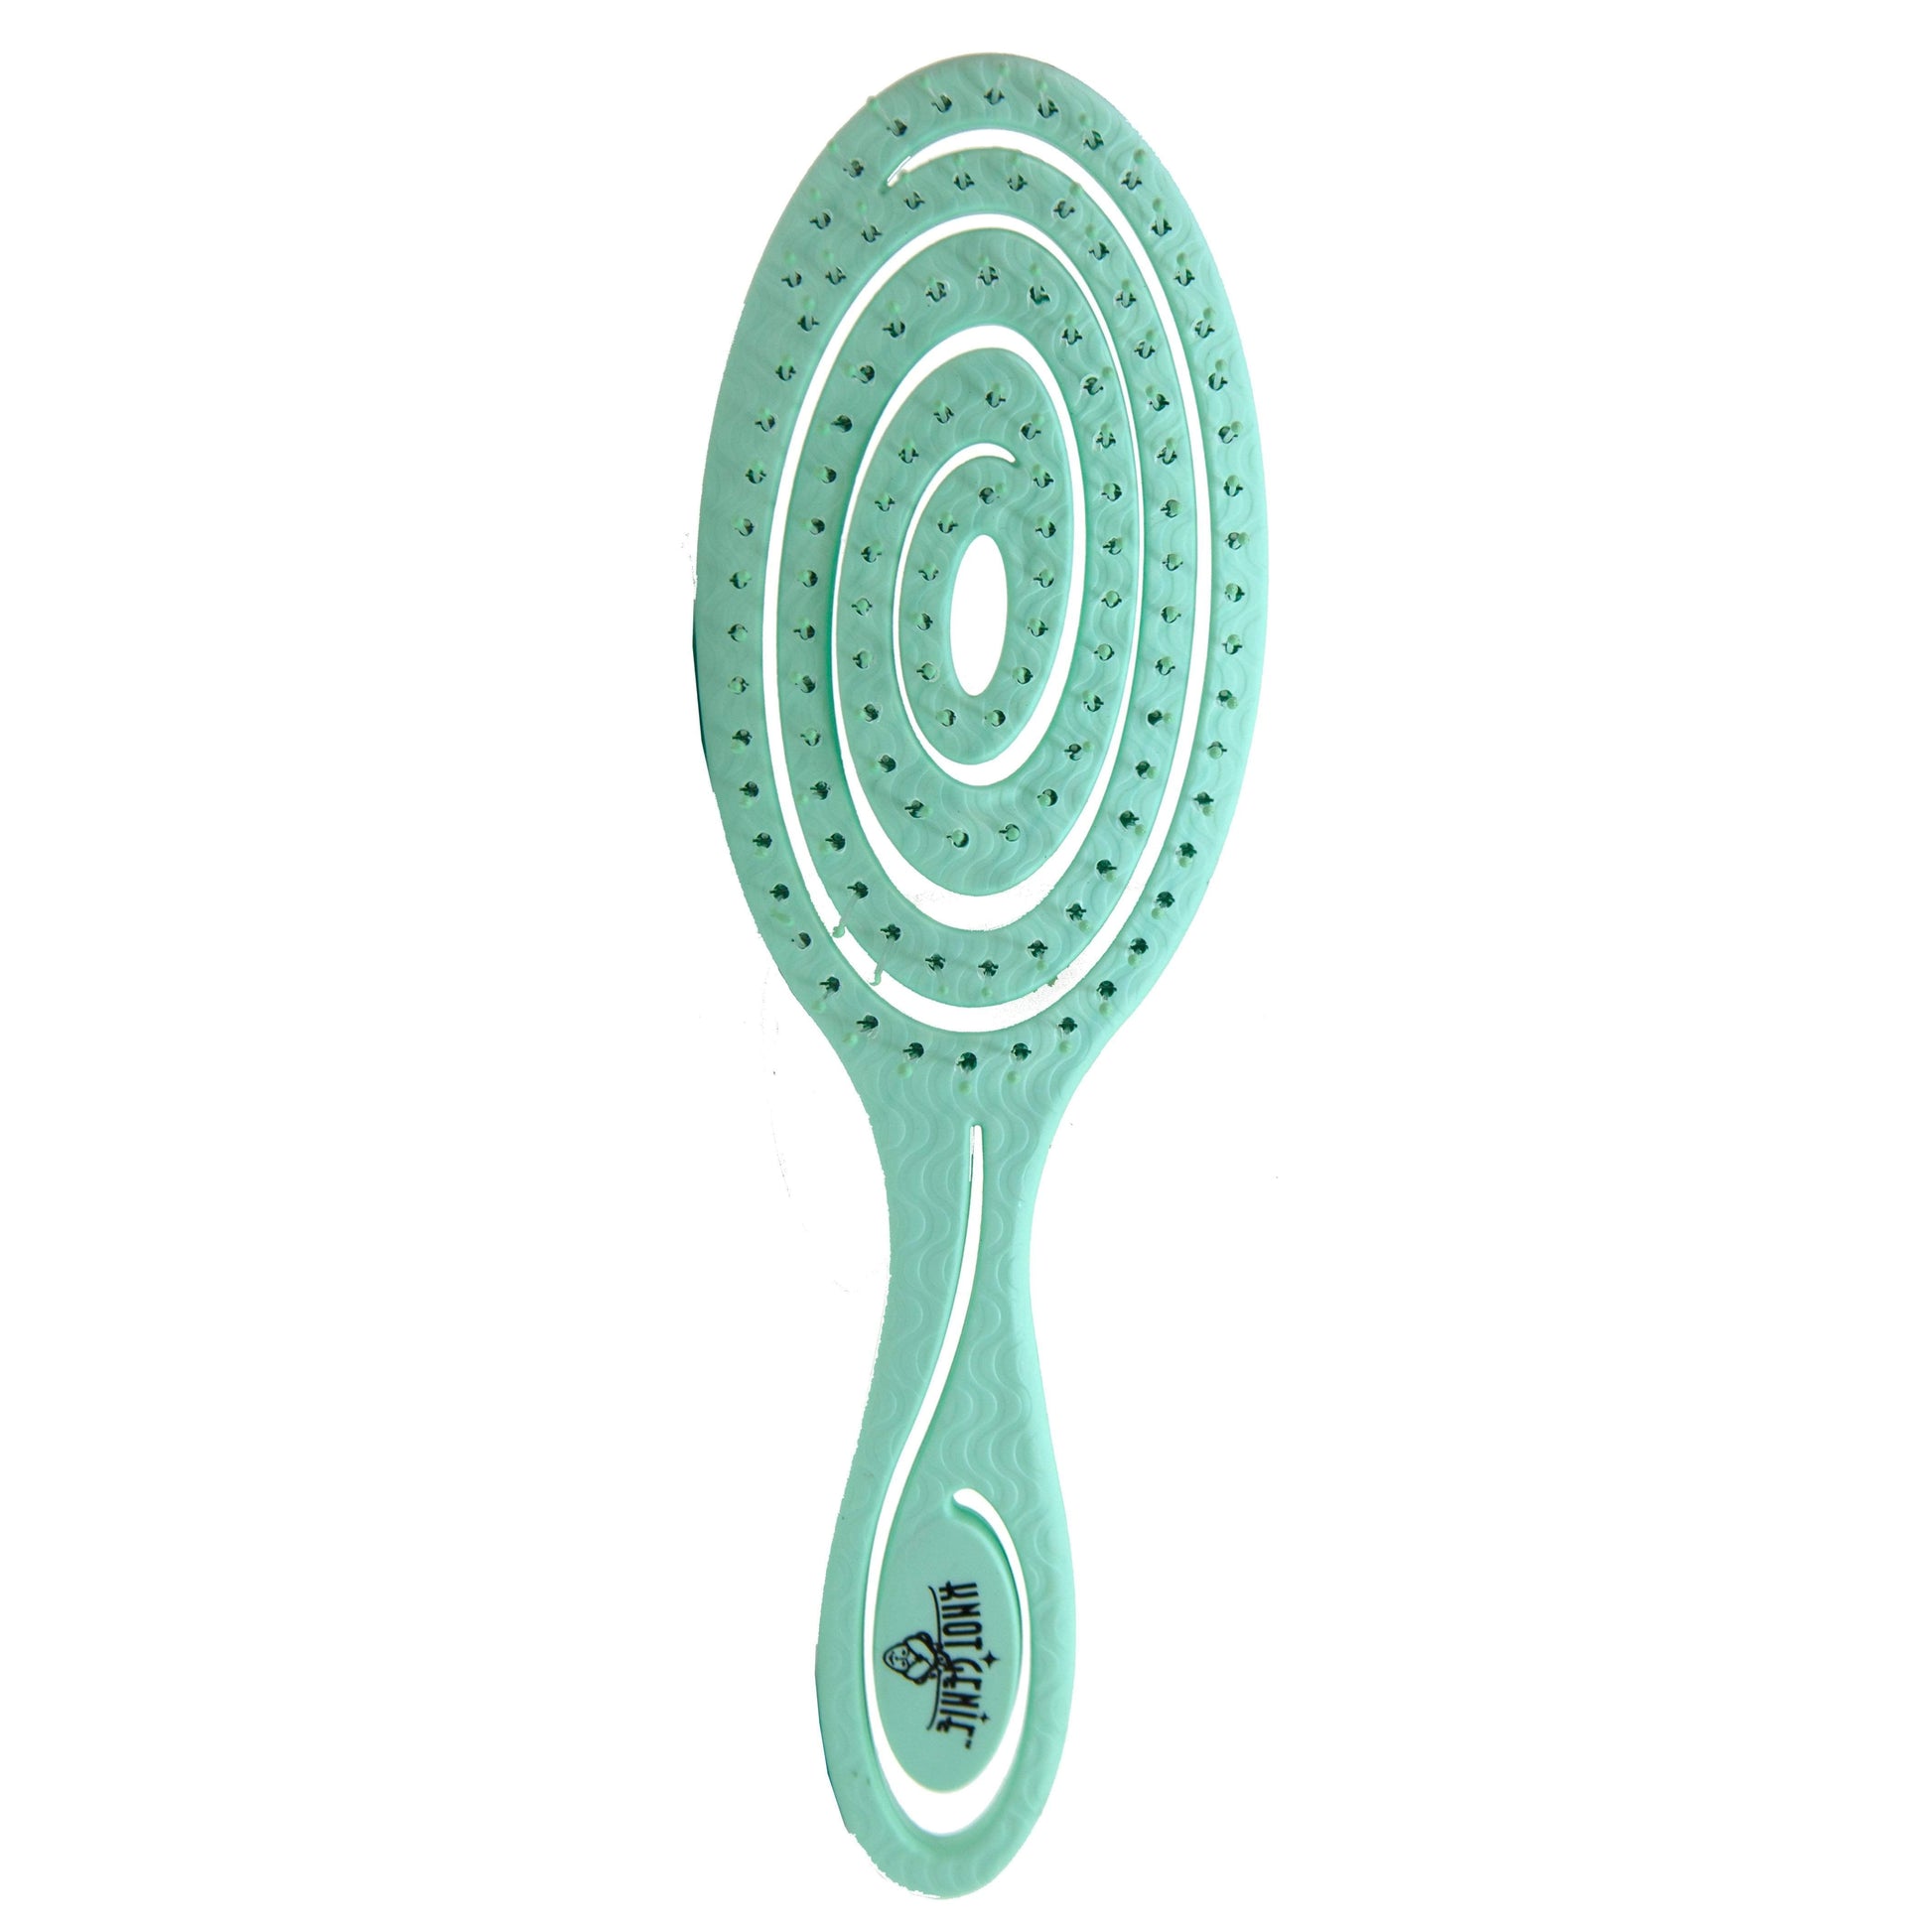 Knot Genie Mother Earth Eco Friendly Detangling Brush-Knot Genie-Brand_Knot Genie,Collection_Hair,Collection_Tools and Brushes,KNOT_Mother Earth Detangler,Tool_Brushes,Tool_Detangling Brush,Tool_Hair Tools,Tool_Vented Brushes